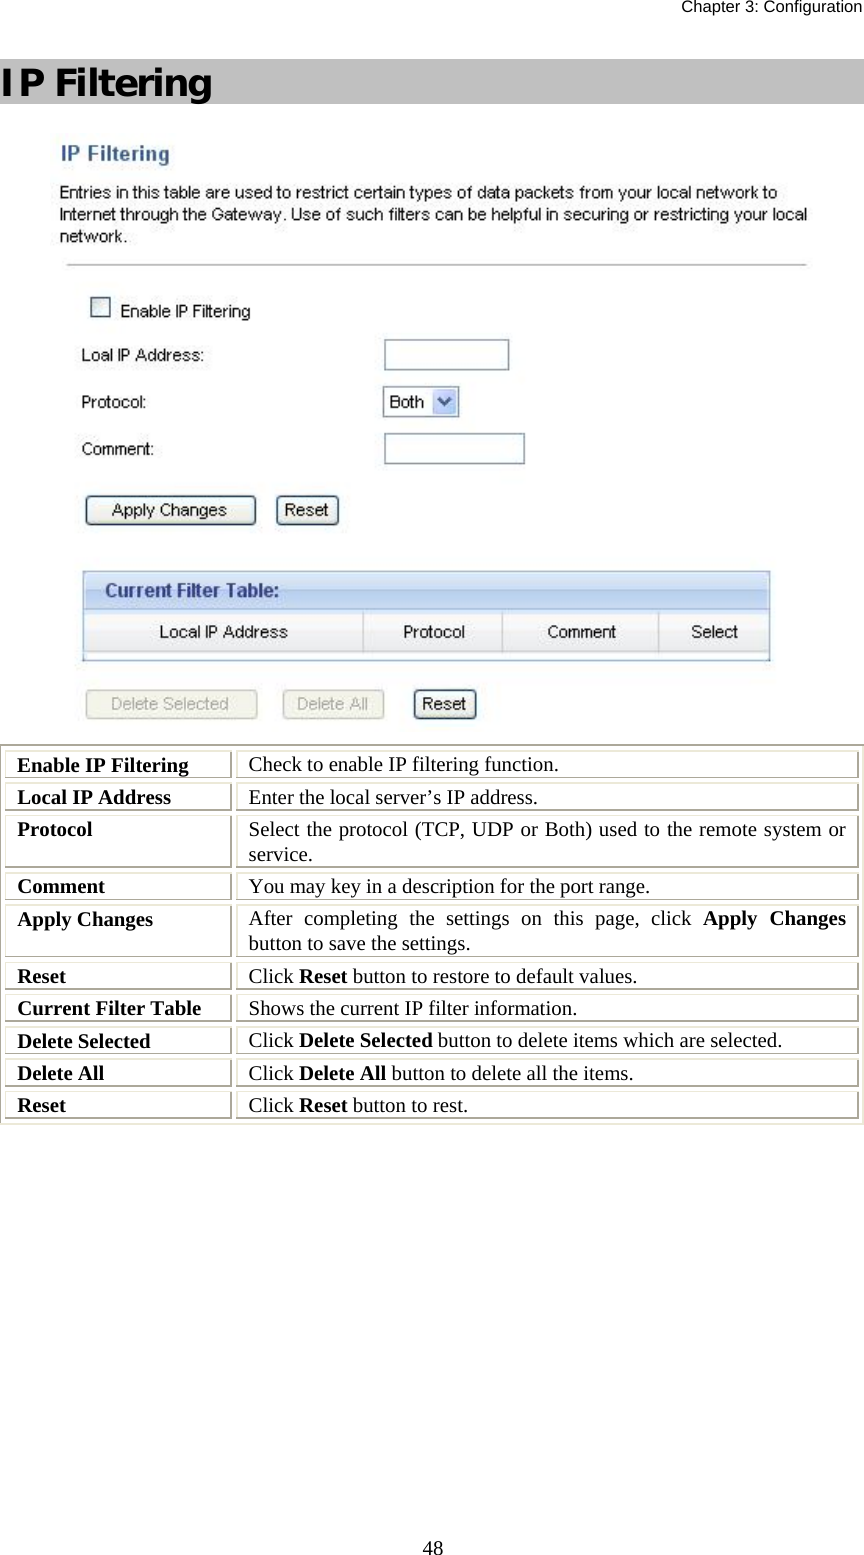   Chapter 3: Configuration  48IP Filtering  Enable IP Filtering  Check to enable IP filtering function. Local IP Address  Enter the local server’s IP address. Protocol  Select the protocol (TCP, UDP or Both) used to the remote system or service. Comment  You may key in a description for the port range. Apply Changes  After completing the settings on this page, click Apply Changes button to save the settings. Reset  Click Reset button to restore to default values. Current Filter Table  Shows the current IP filter information. Delete Selected  Click Delete Selected button to delete items which are selected. Delete All  Click Delete All button to delete all the items. Reset  Click Reset button to rest.    